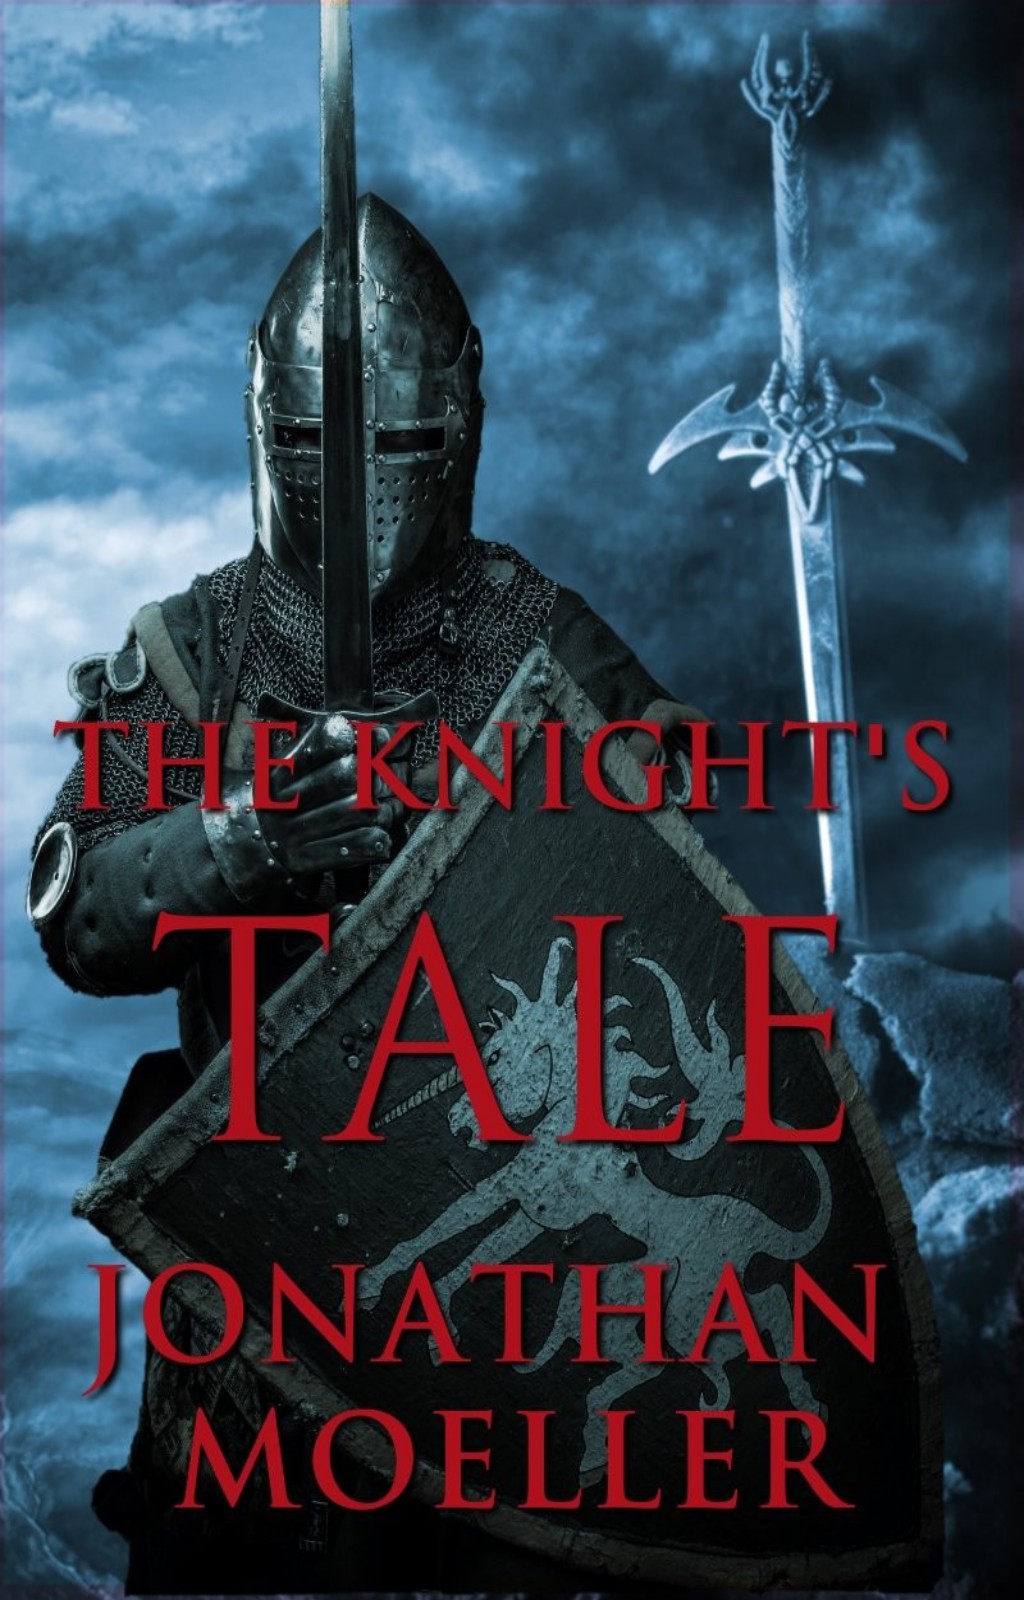 The Knight's Tale by Jonathan Moeller